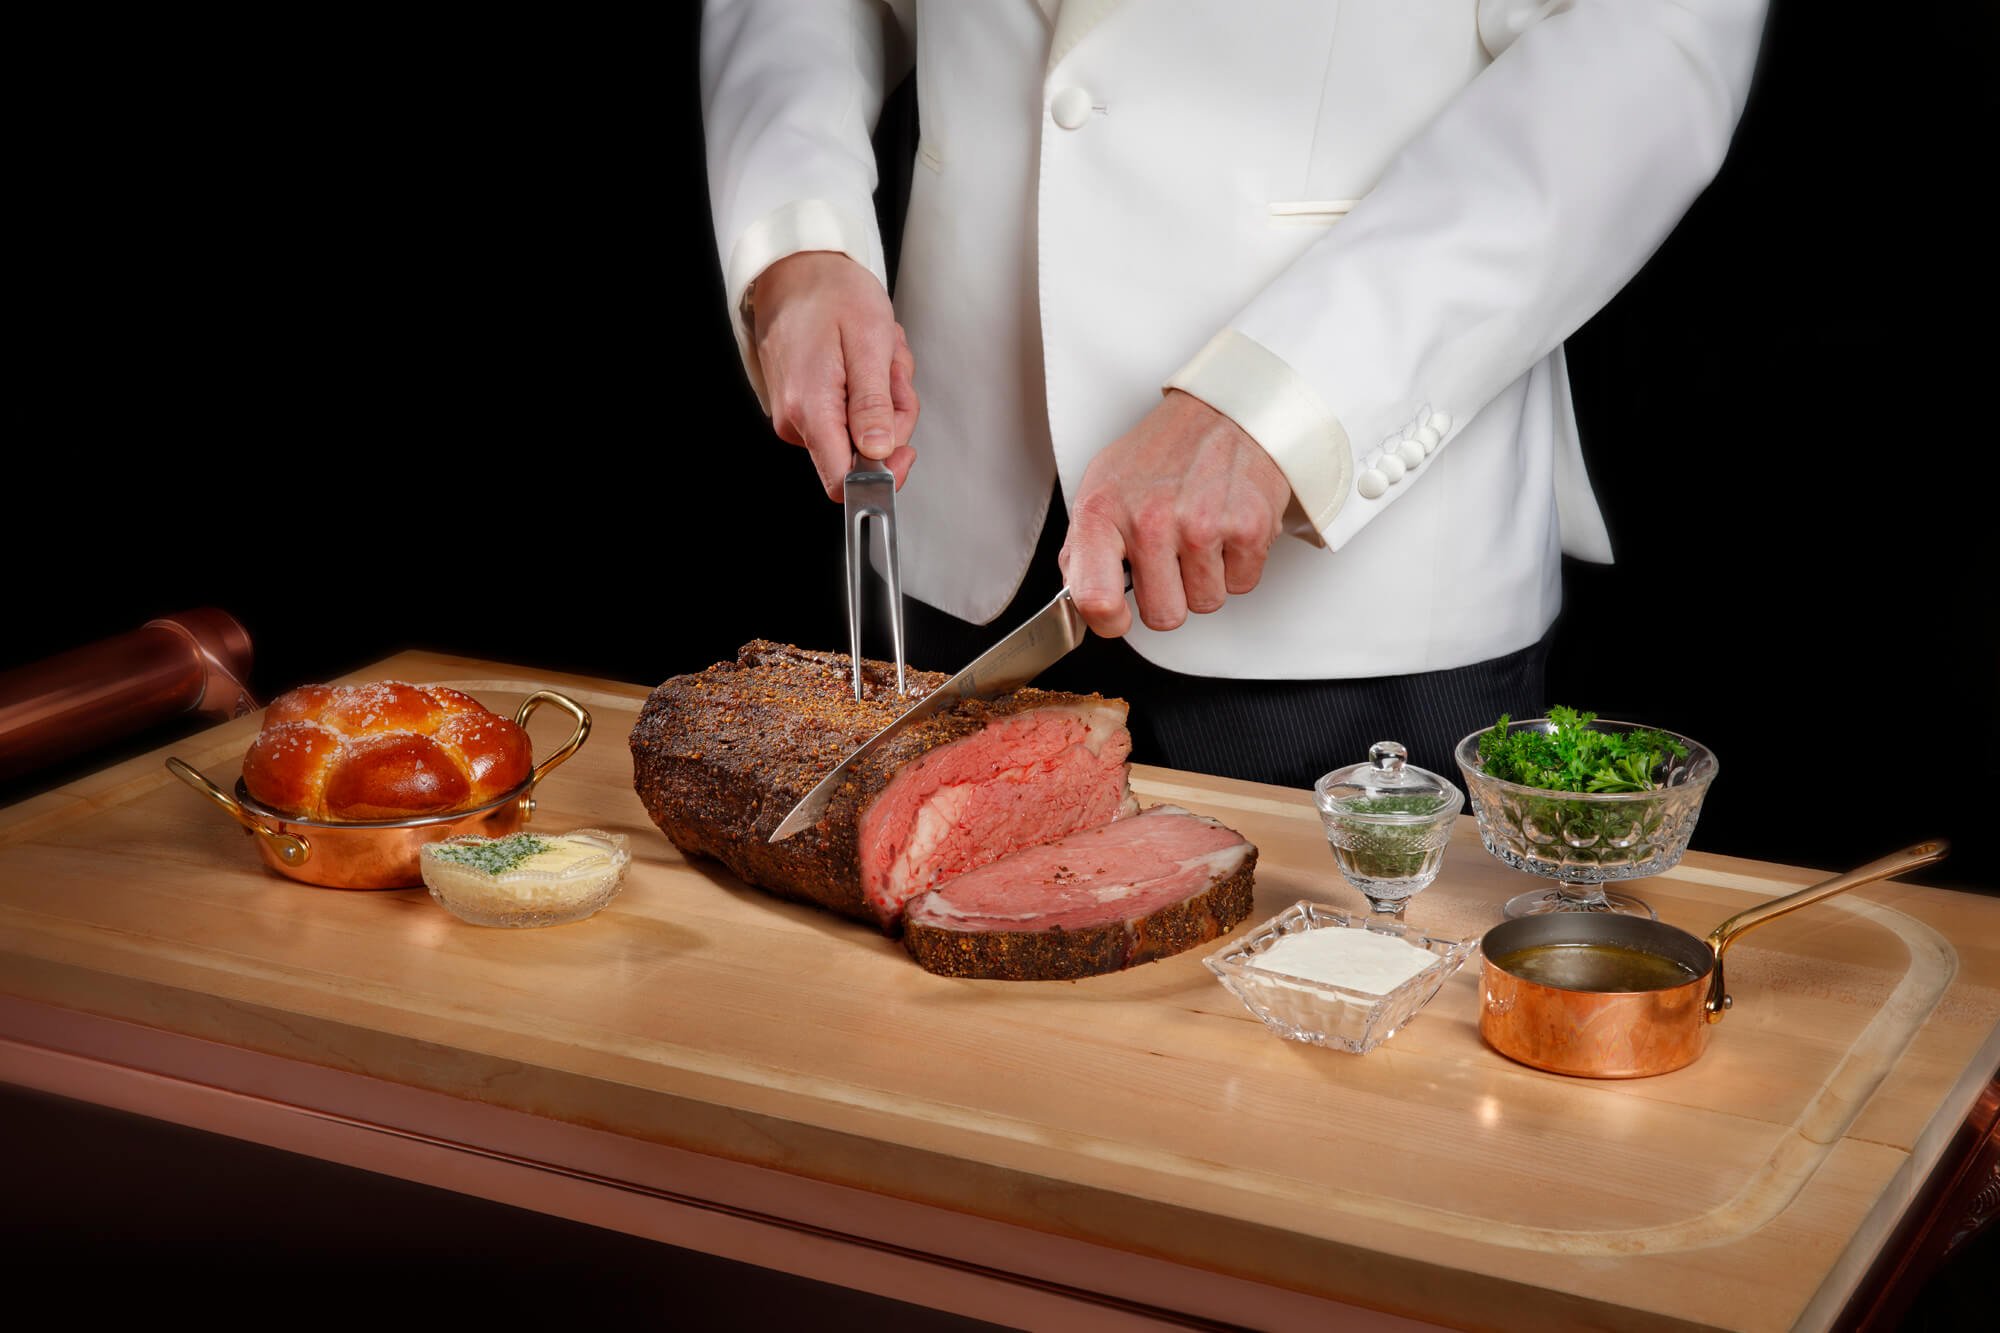 Carving prime rib on a card at The Mayfair Supper Club in Las Vegas